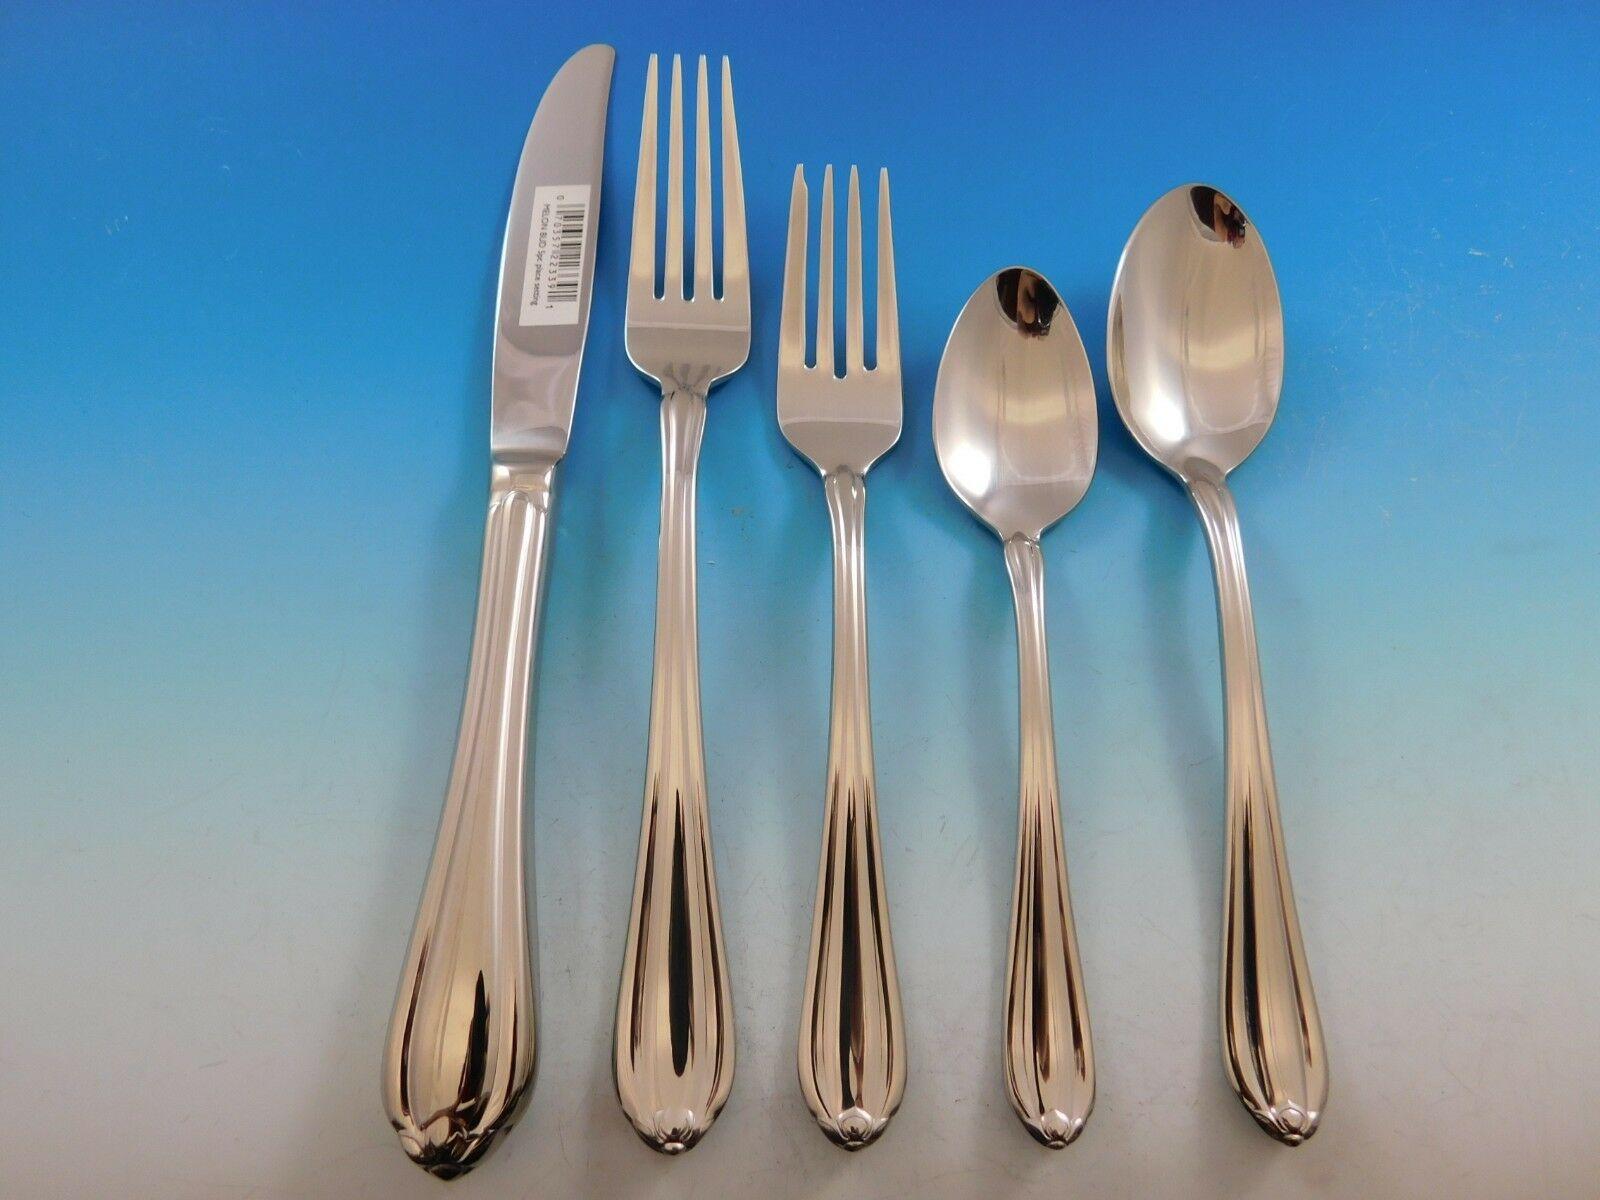 Distinguished by curved channels in each handle and a delicate leaf design on the ends, the Melon Bud Flatware set is simple elegance, perfect with formal or casual dinnerware.

Features:
18/10 Stainless Steel
Shiny, High-Polished